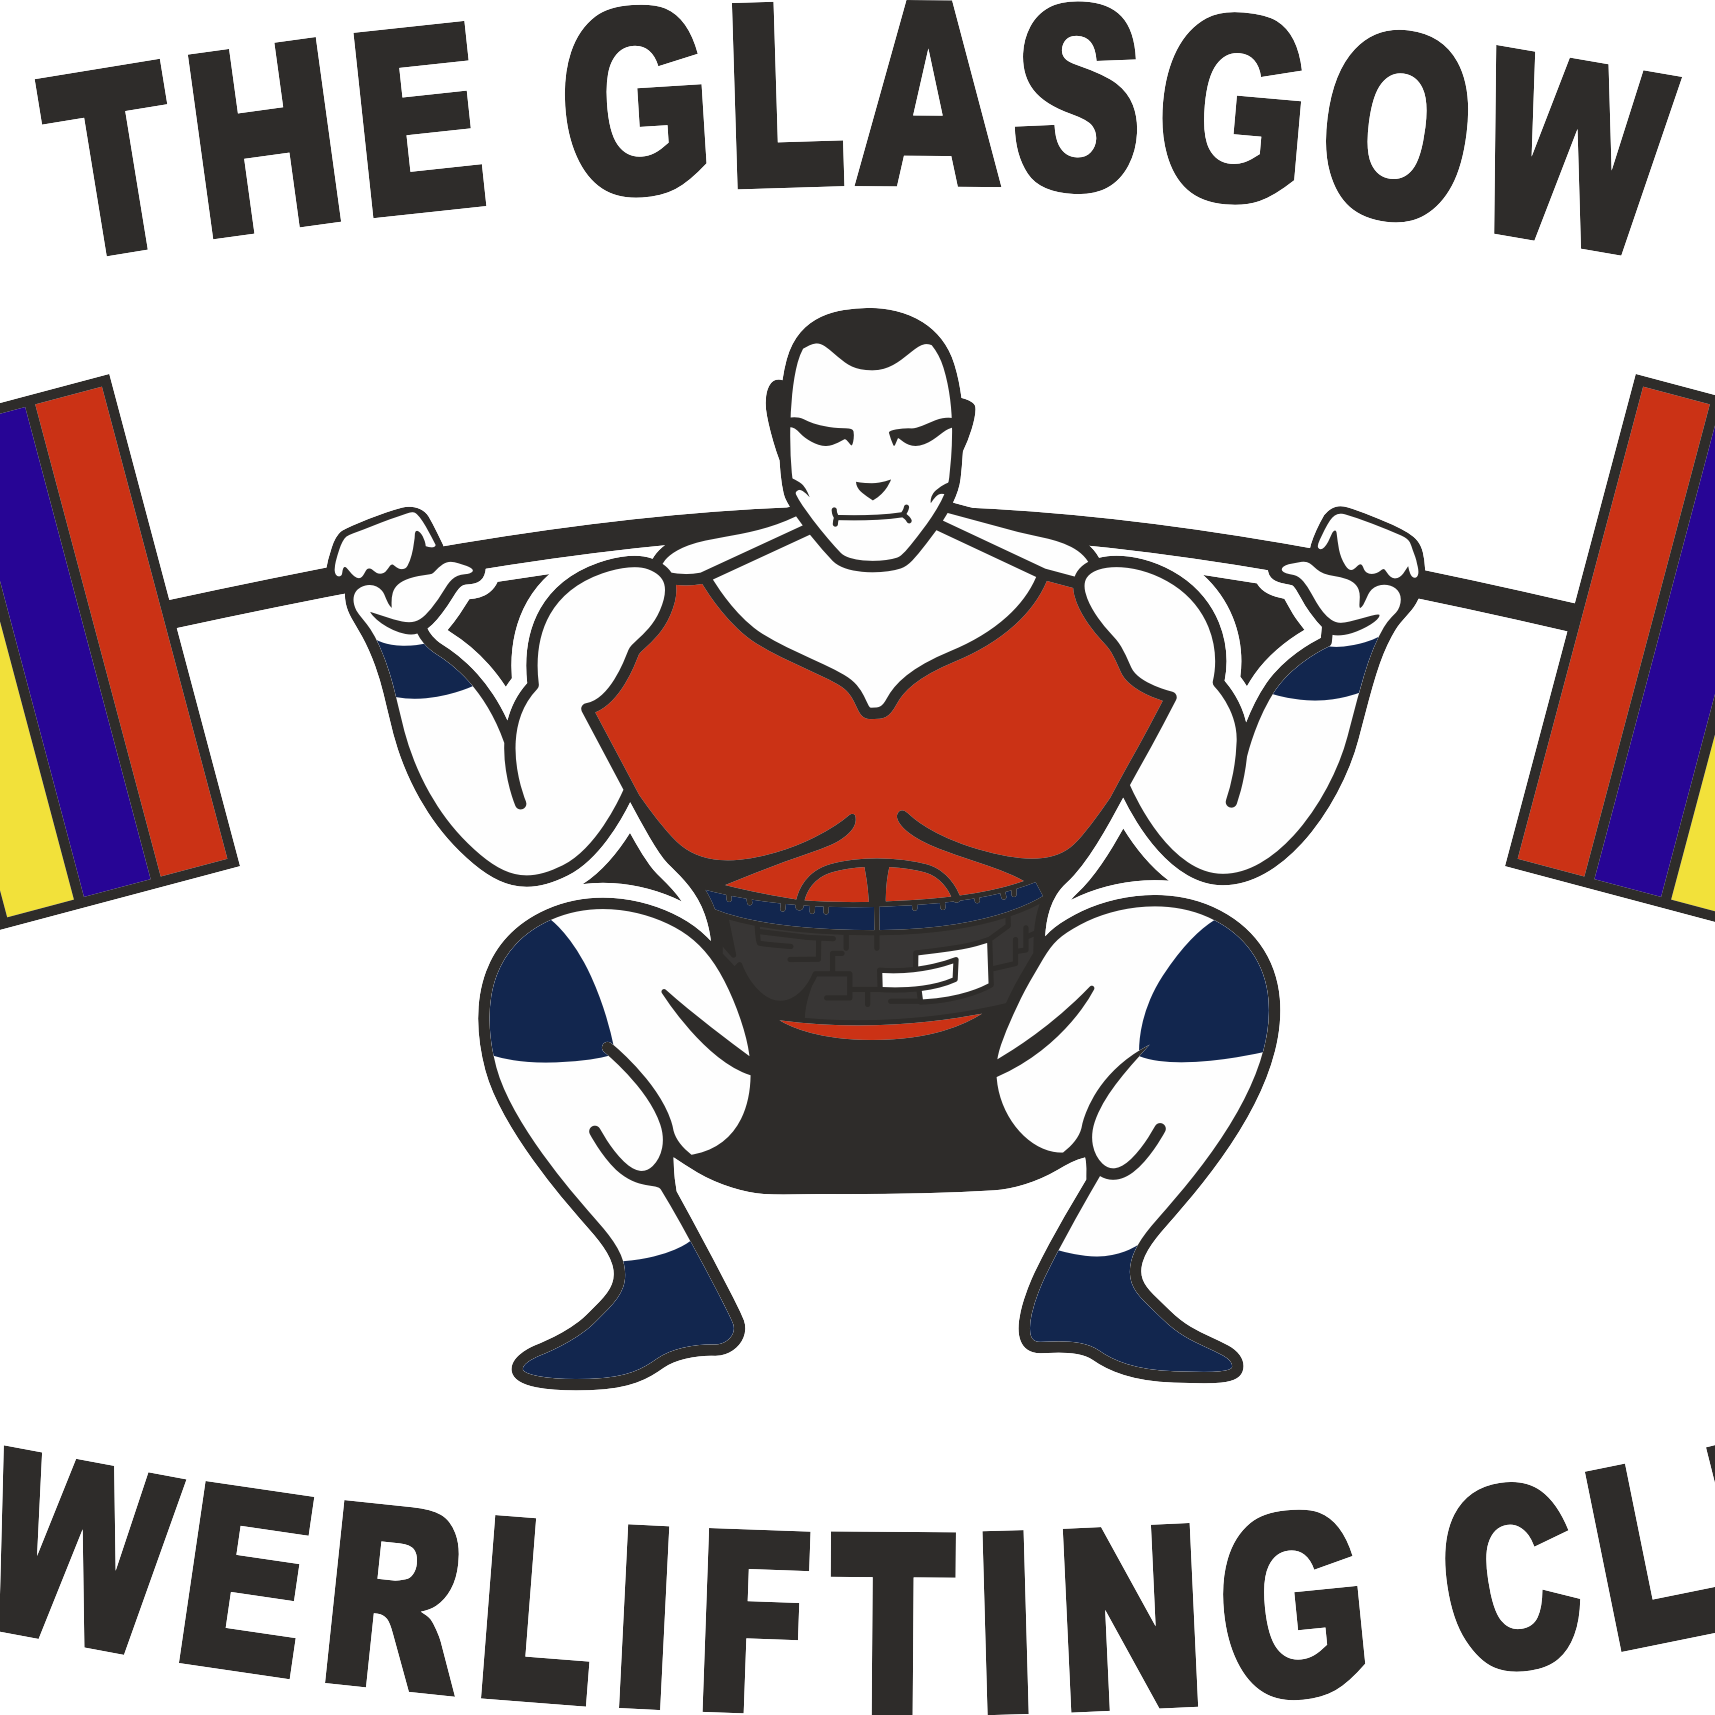 The Glasgow Powerlifting Club is affiliated to the Sports Council for Glasgow. Our aim: to help develop the sport of powerlifting.